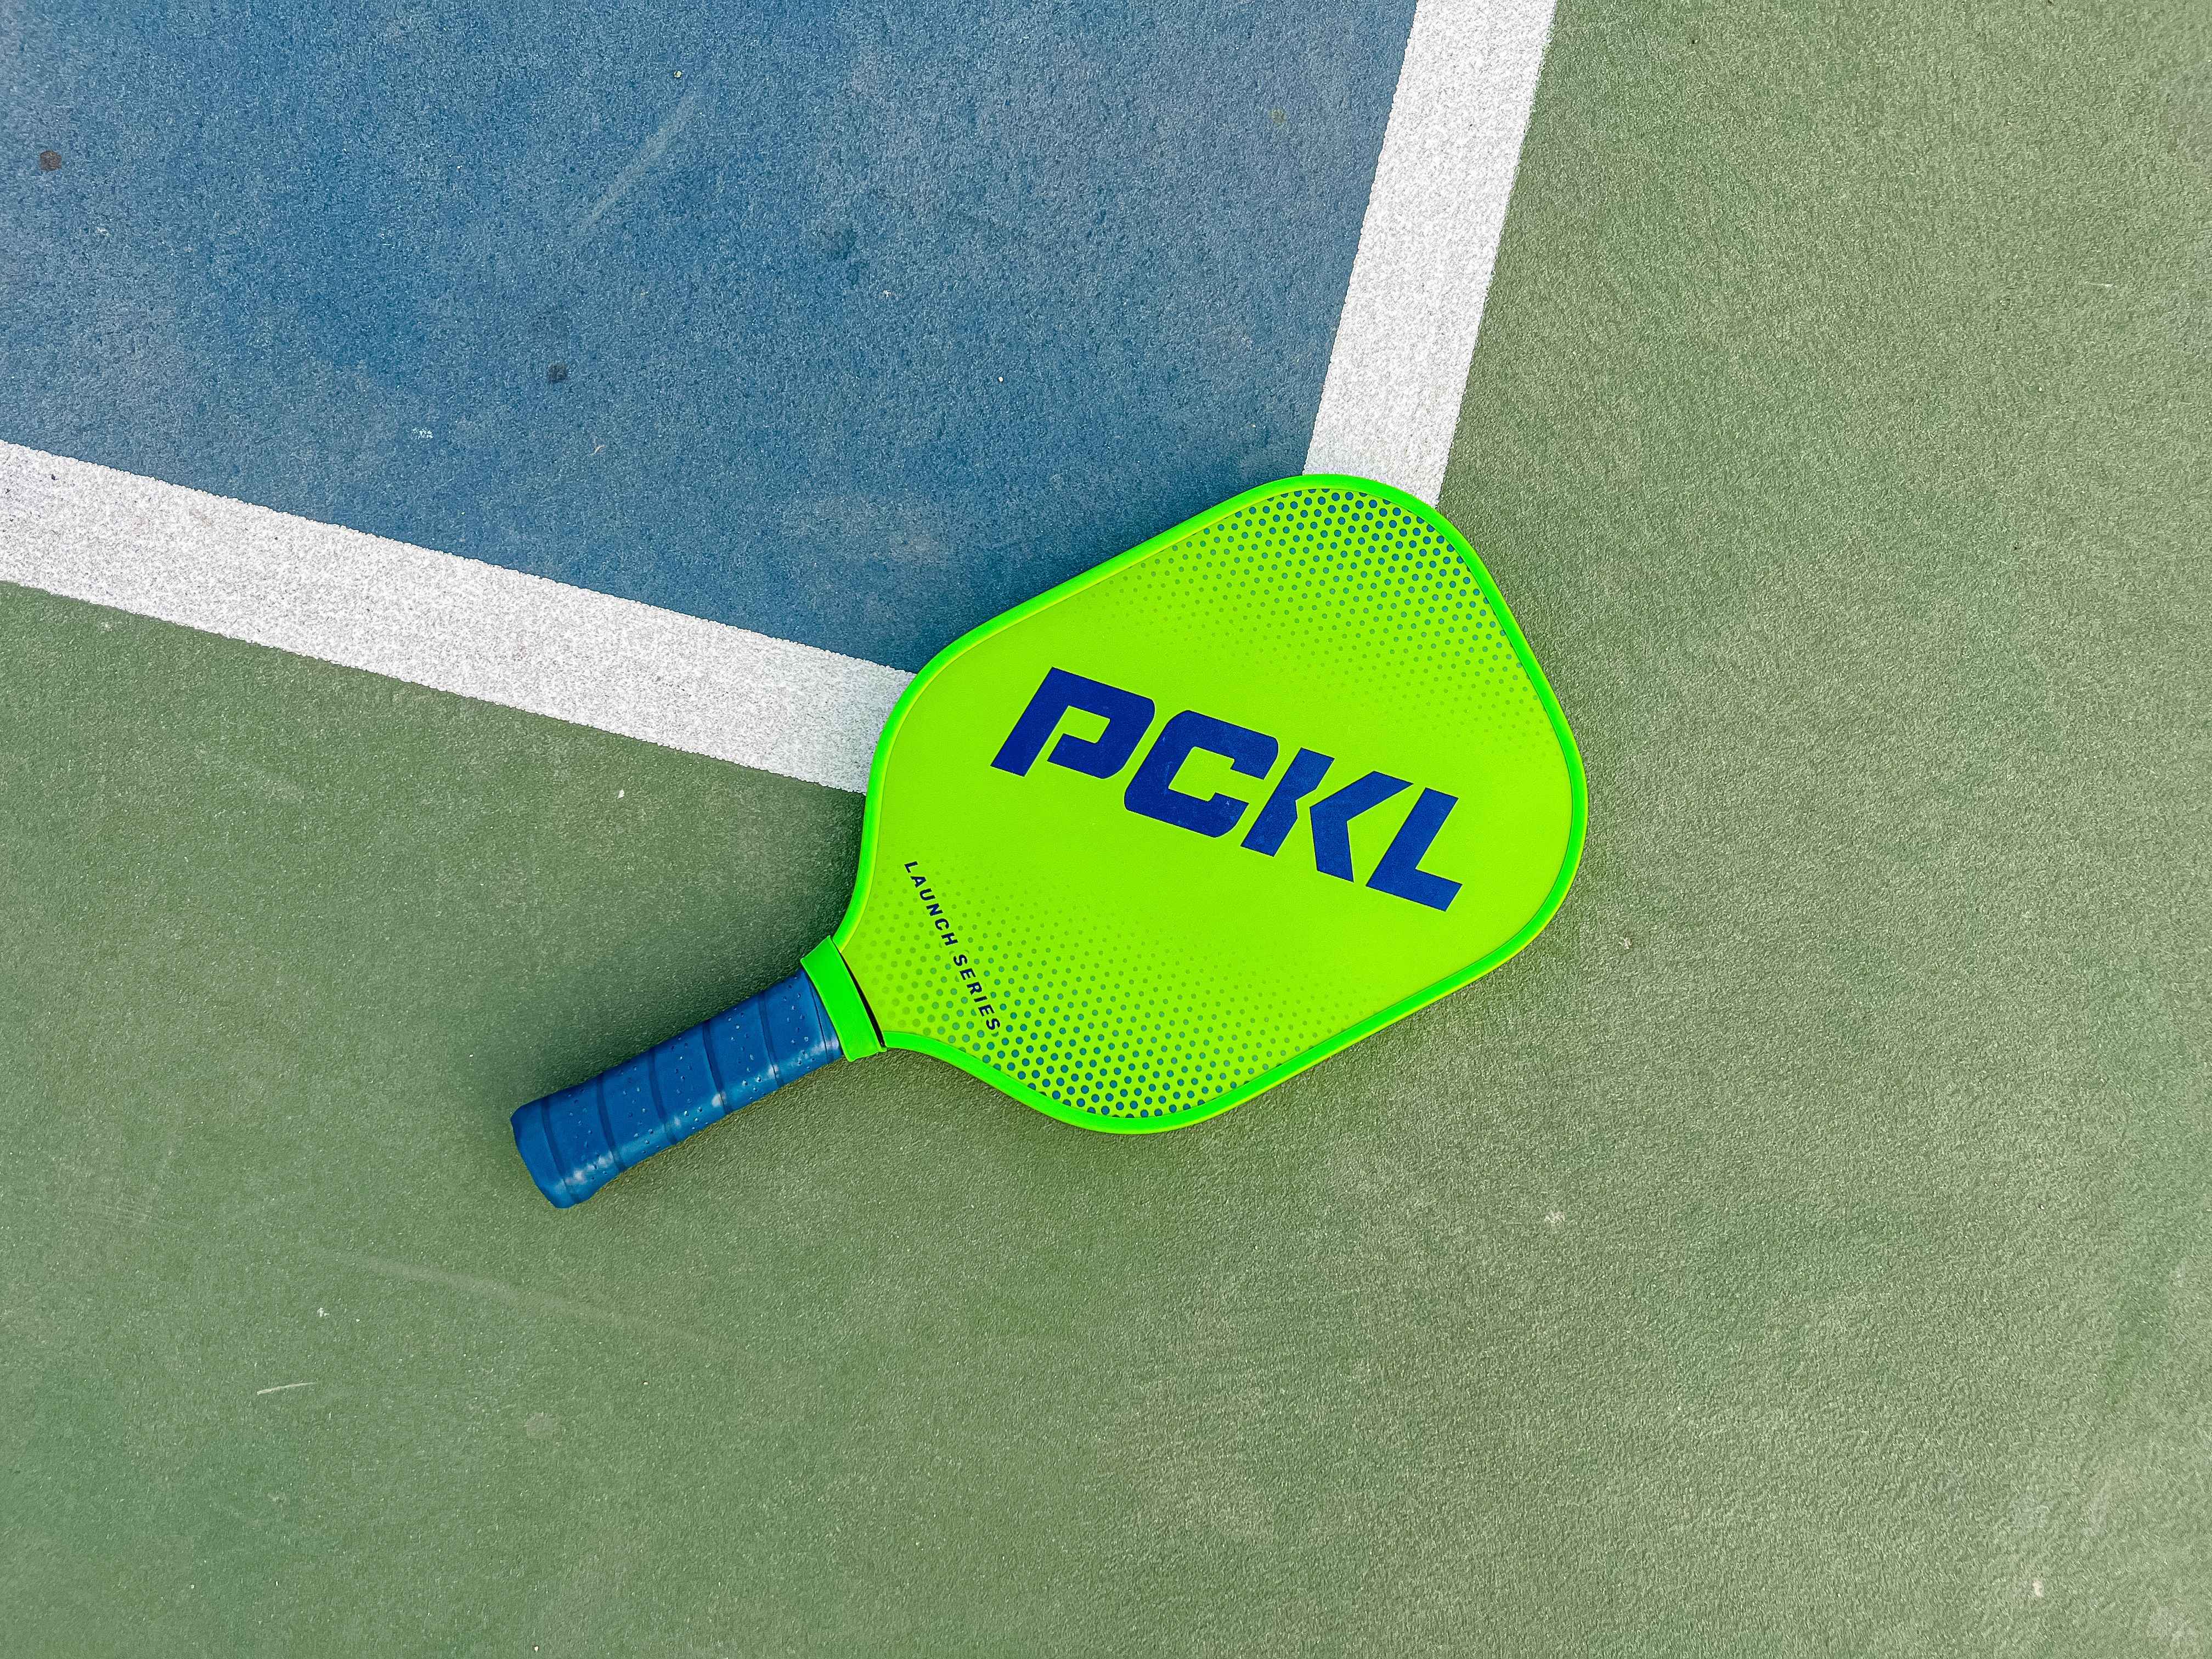 The PCKL Launch Series paddle placed at the edge of a pickleball court